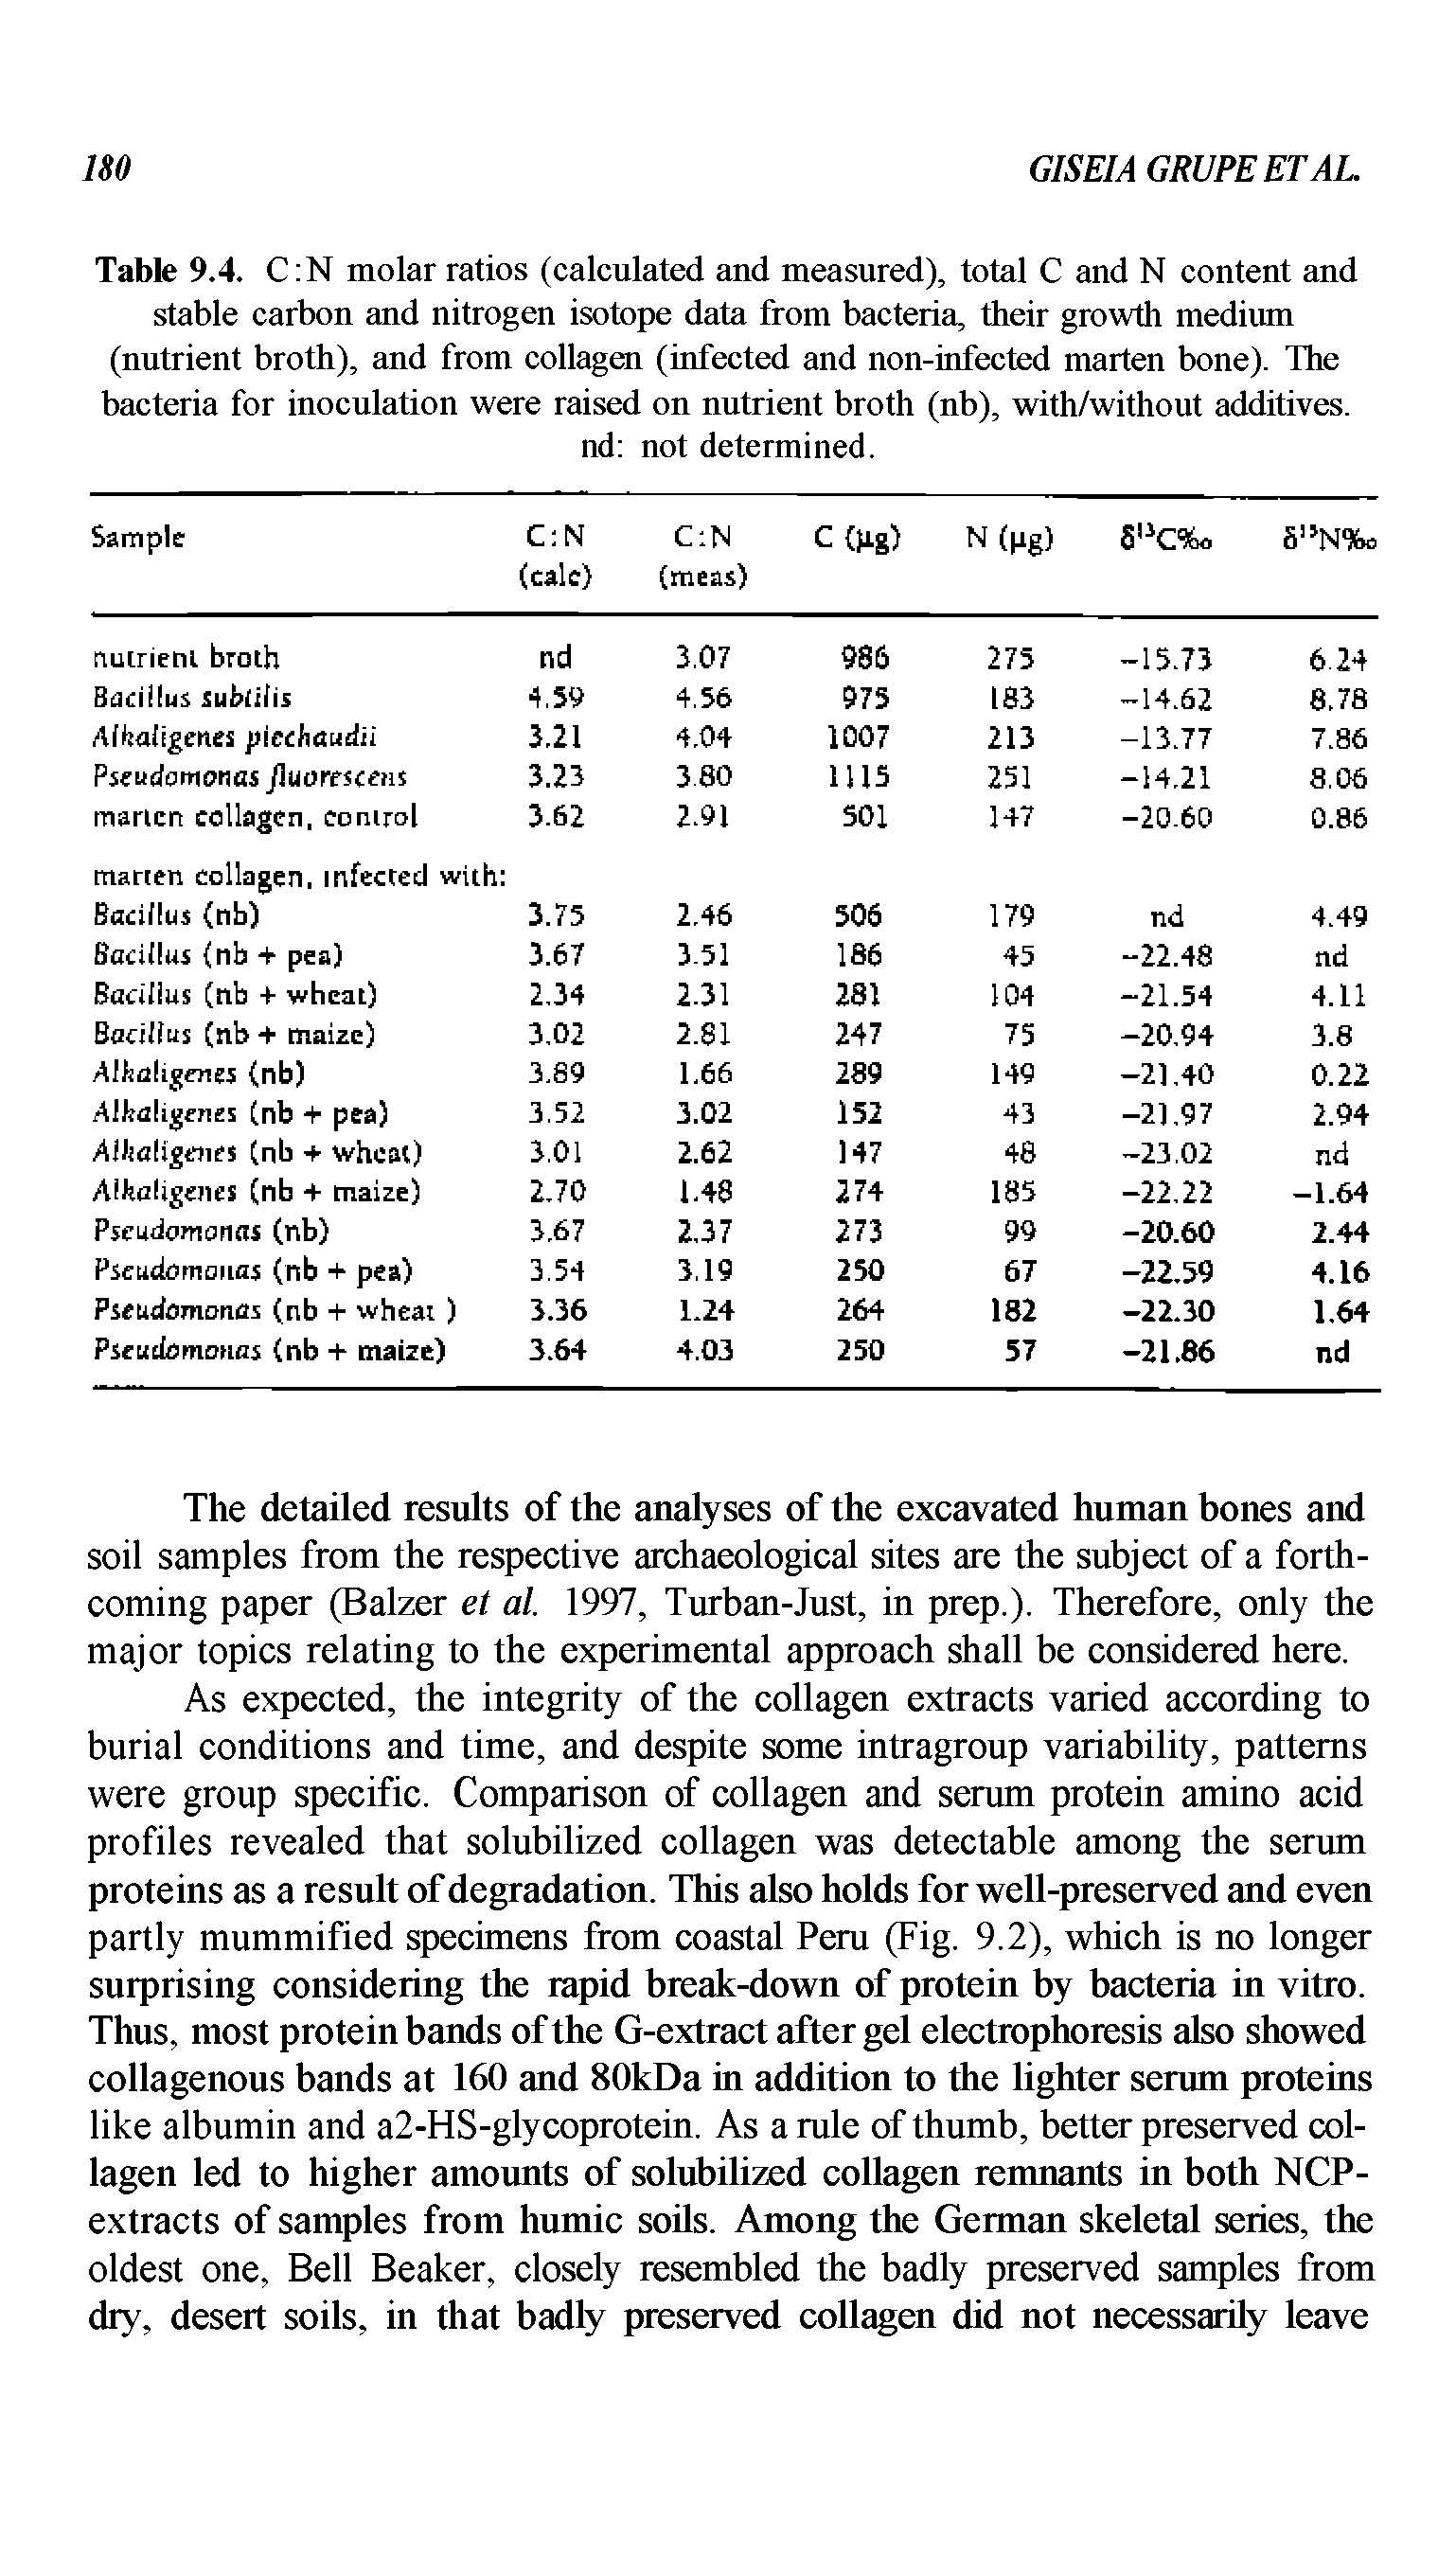 Table 9.4. C N molar ratios (calculated and measured), total C and N content and stable carbon and nitrogen isotope data from bacteria, their growth medium (nutrient broth), and from collagen (infected and non-infected marten bone). The bacteria for inoculation were raised on nutrient broth (nb), with/without additives.